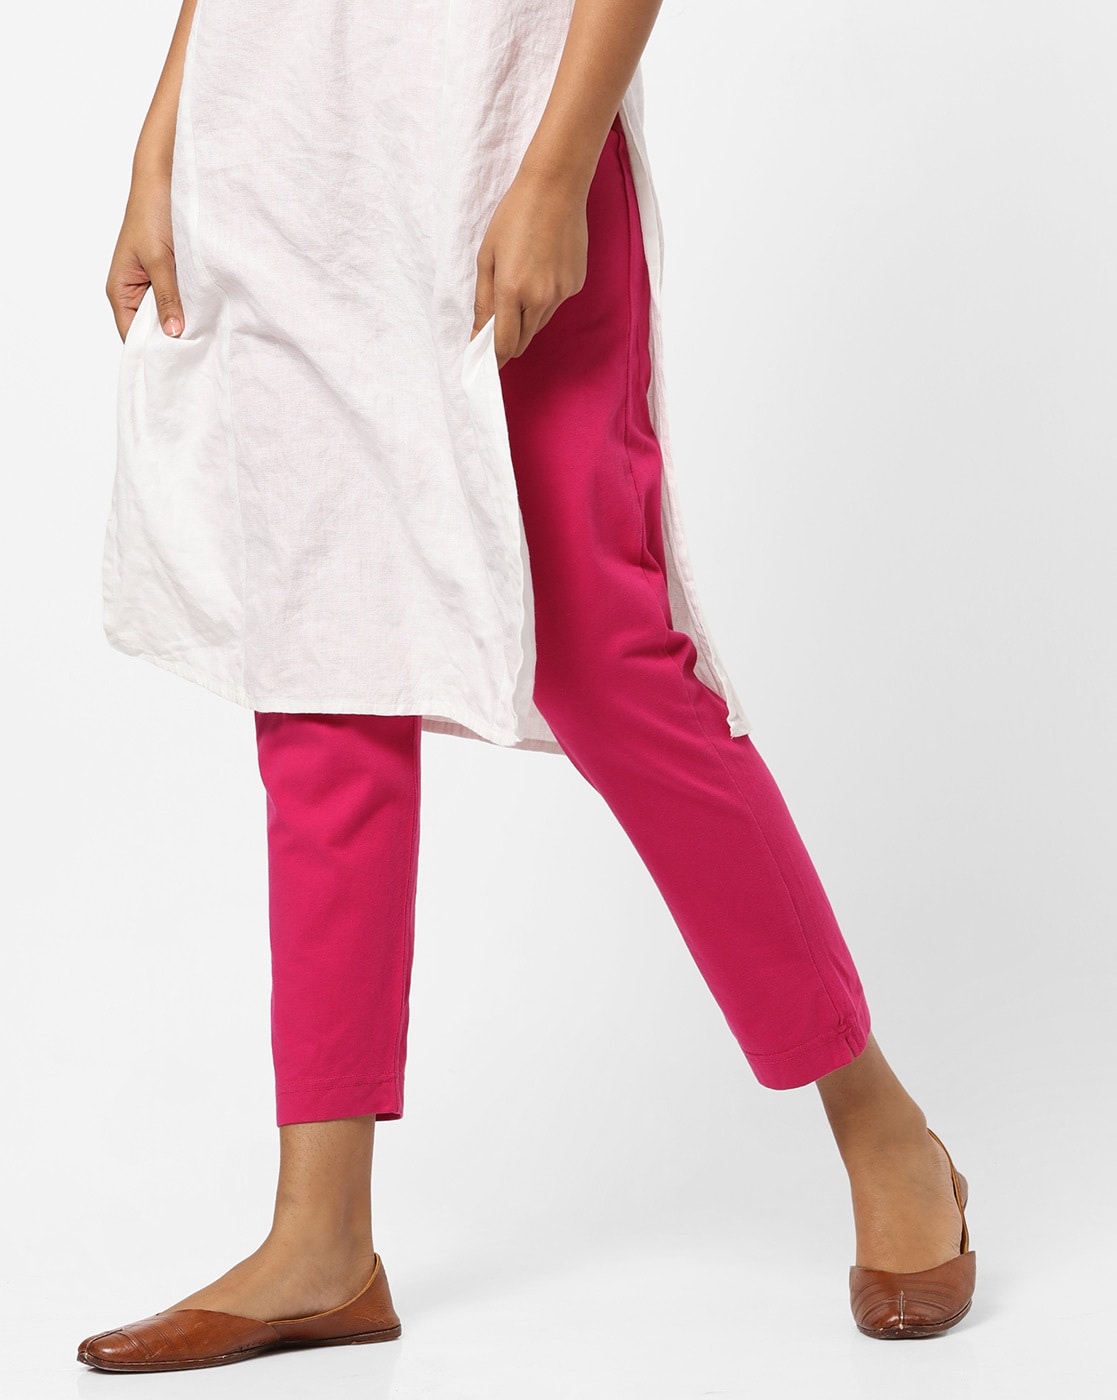 ankle length pants